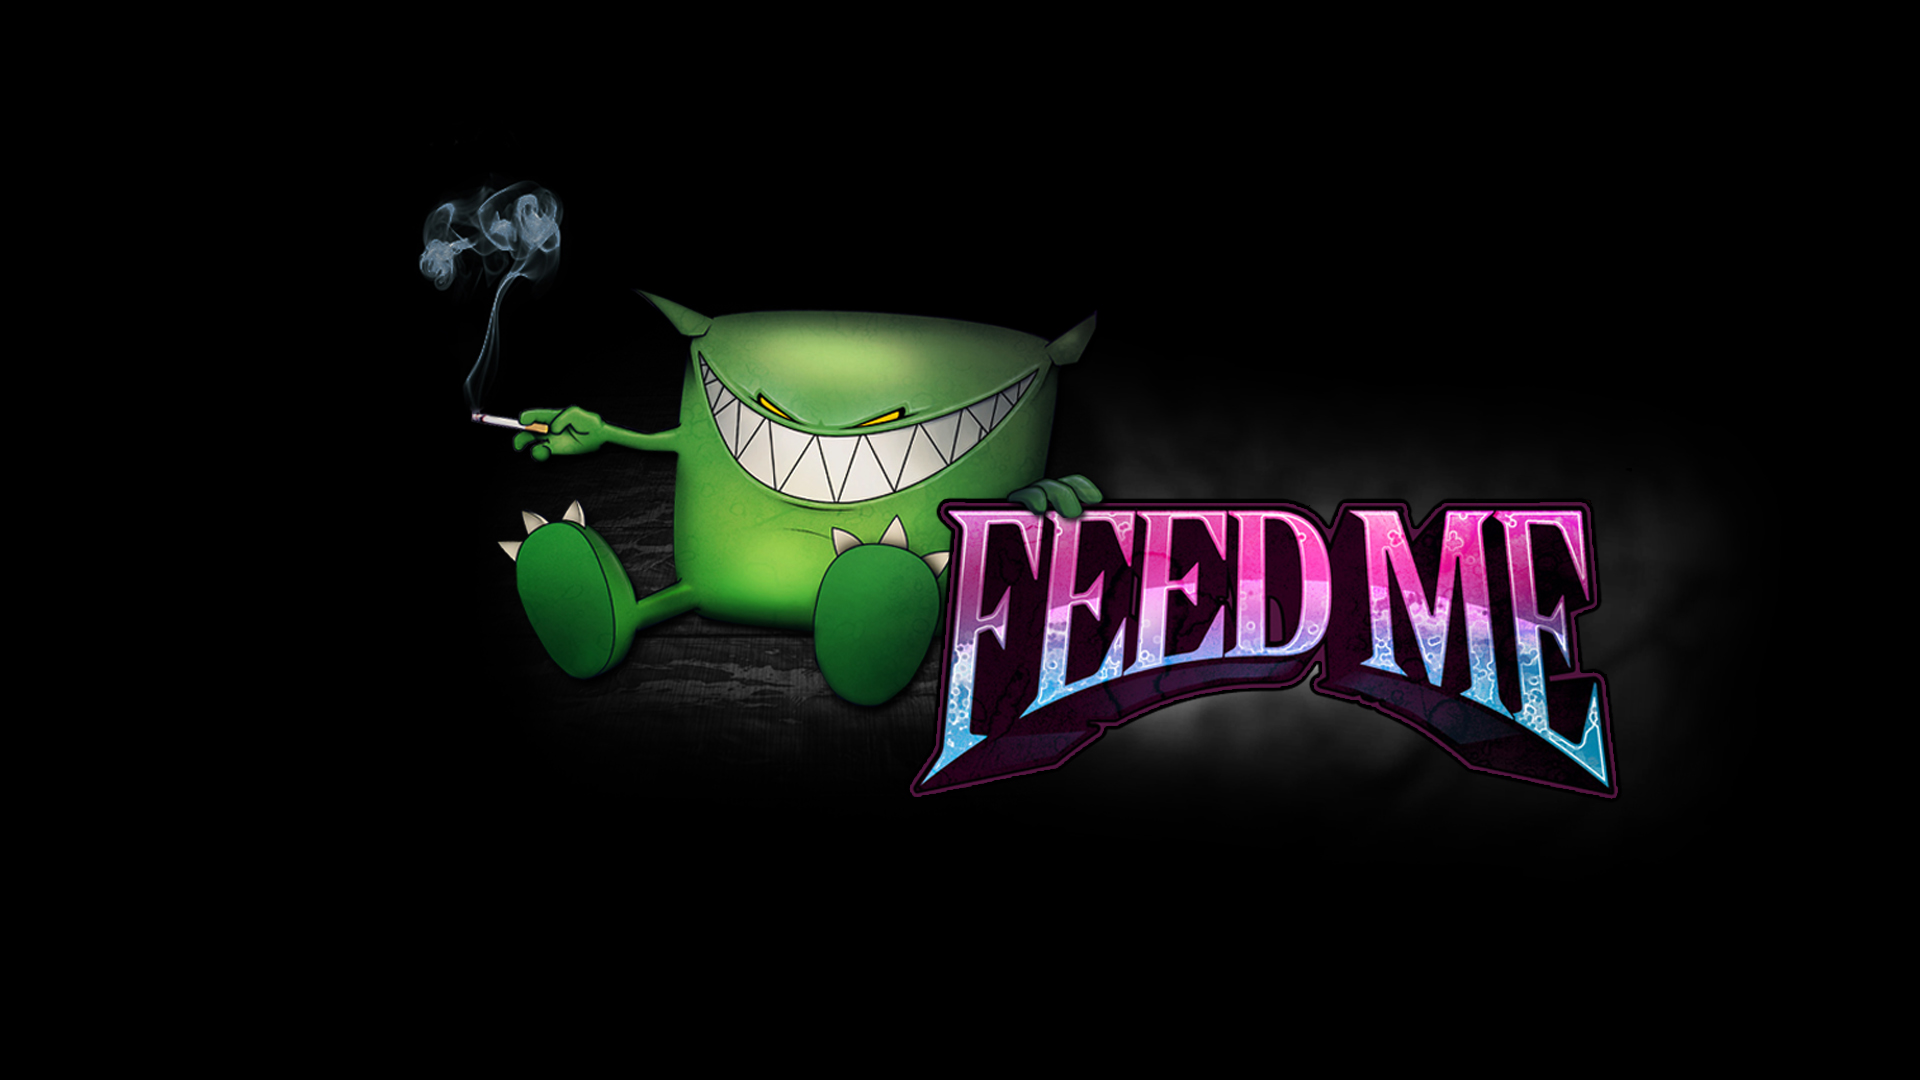 Music Feed Me HD Wallpaper | Background Image